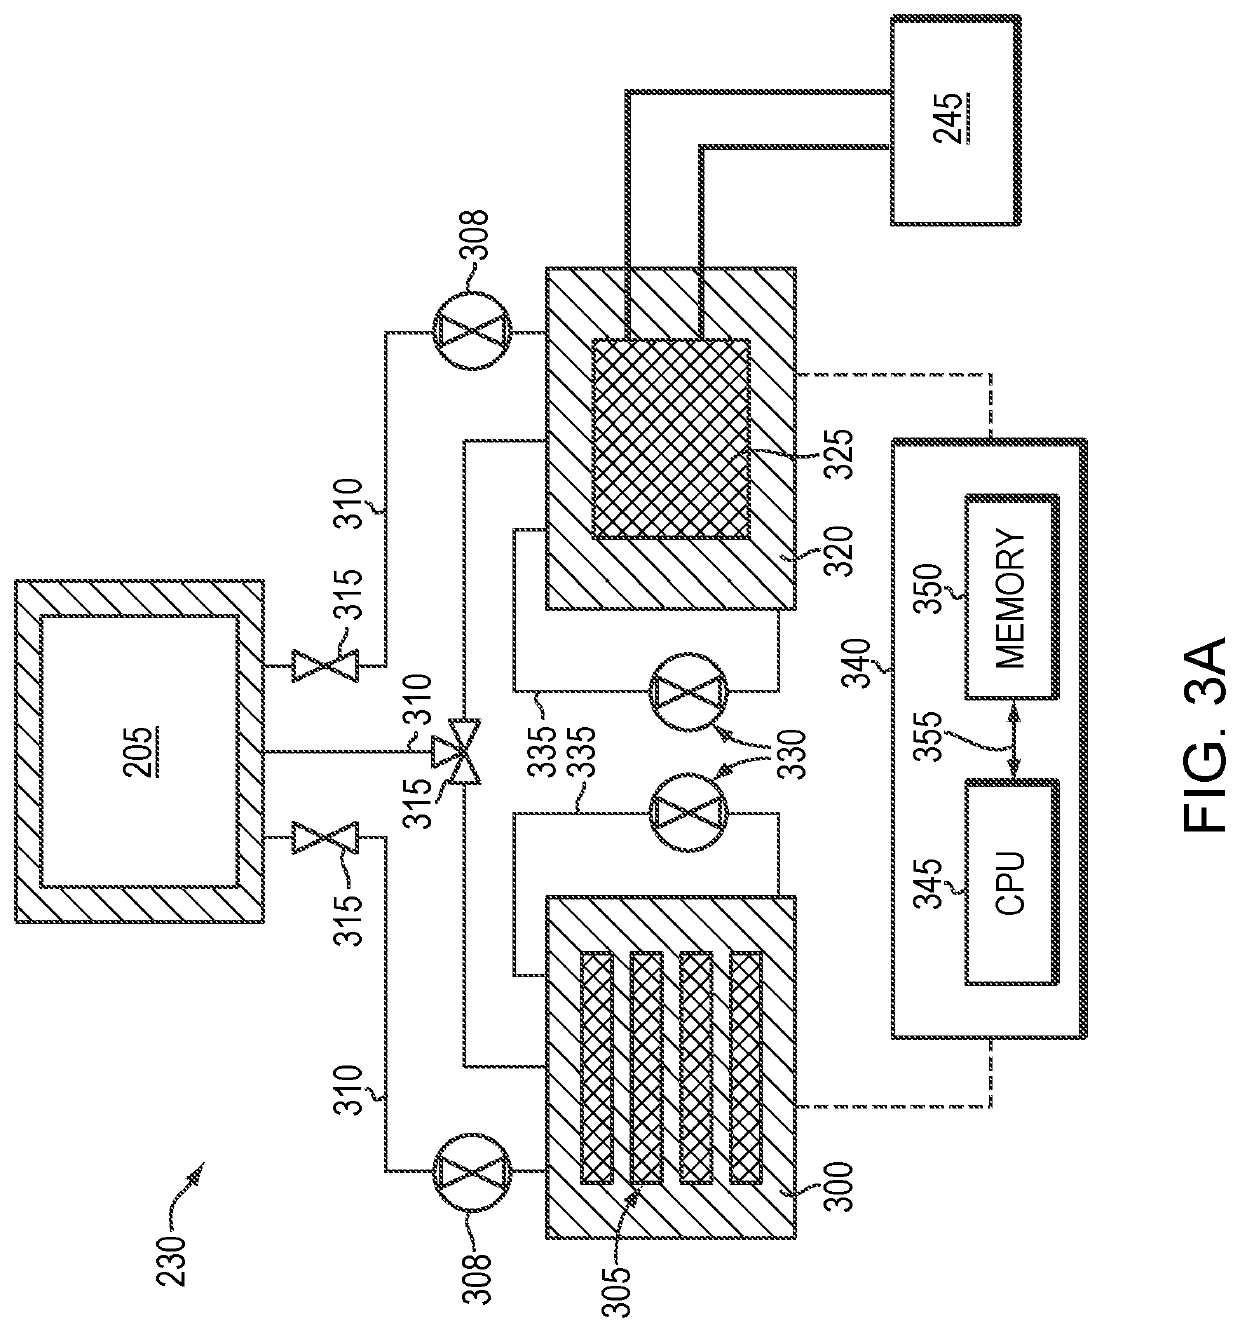 Fluid-assisted thermal management of evaporation sources